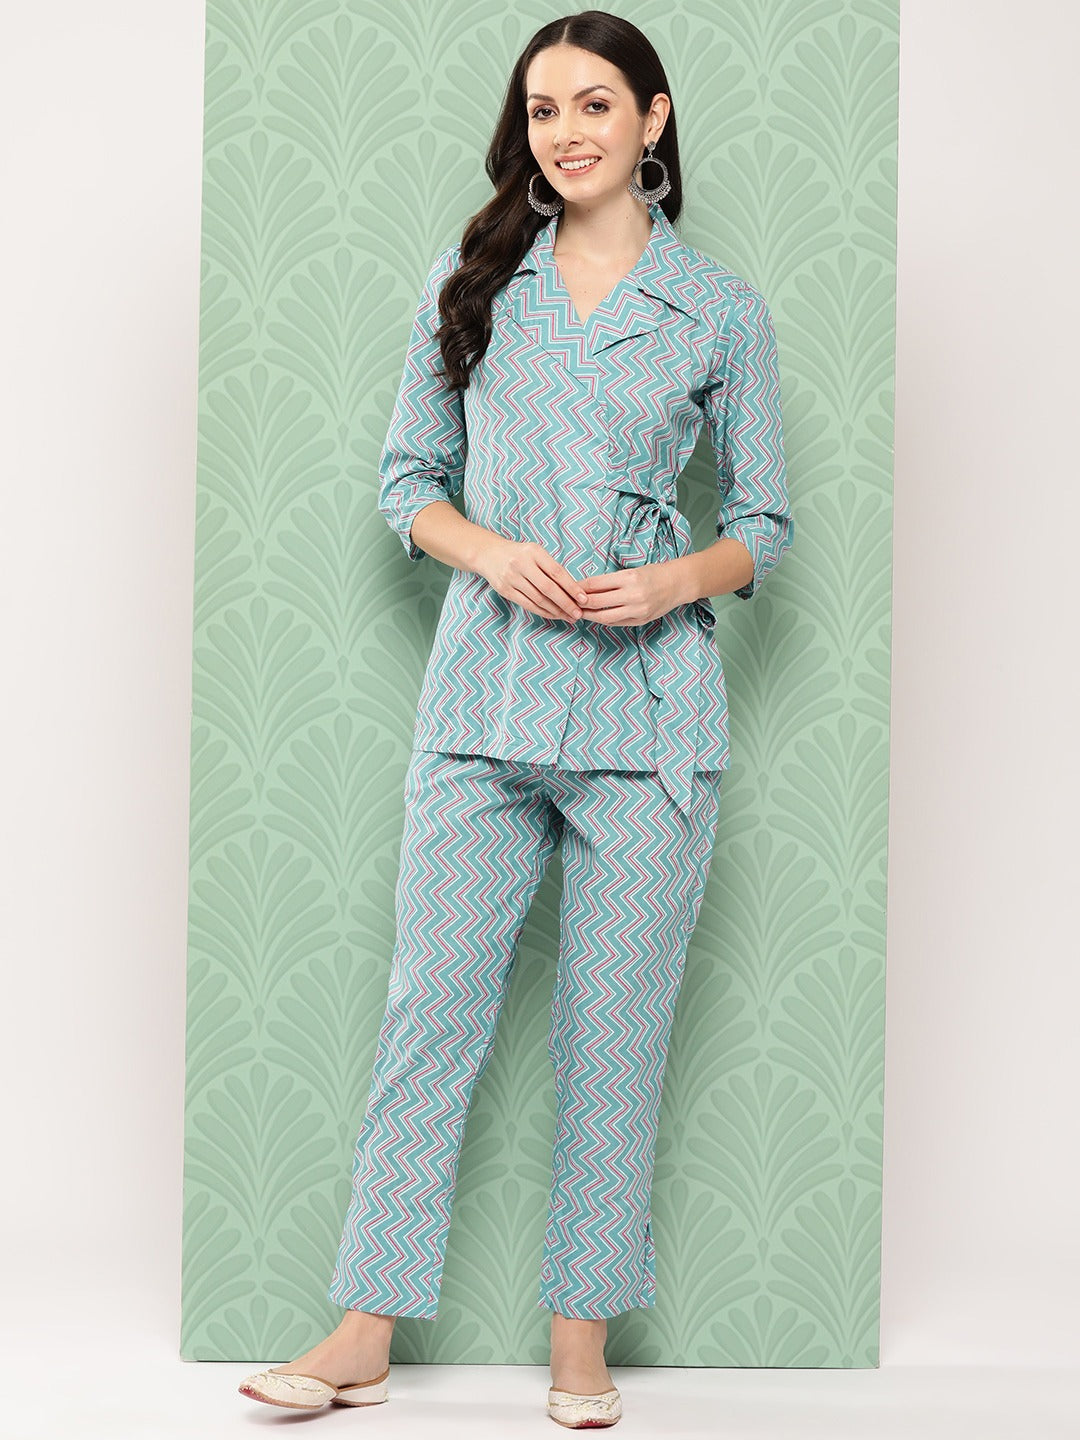 Teal Blue Printed Pure Cotton Top with Trousers-Yufta Store-1464CRDTBS